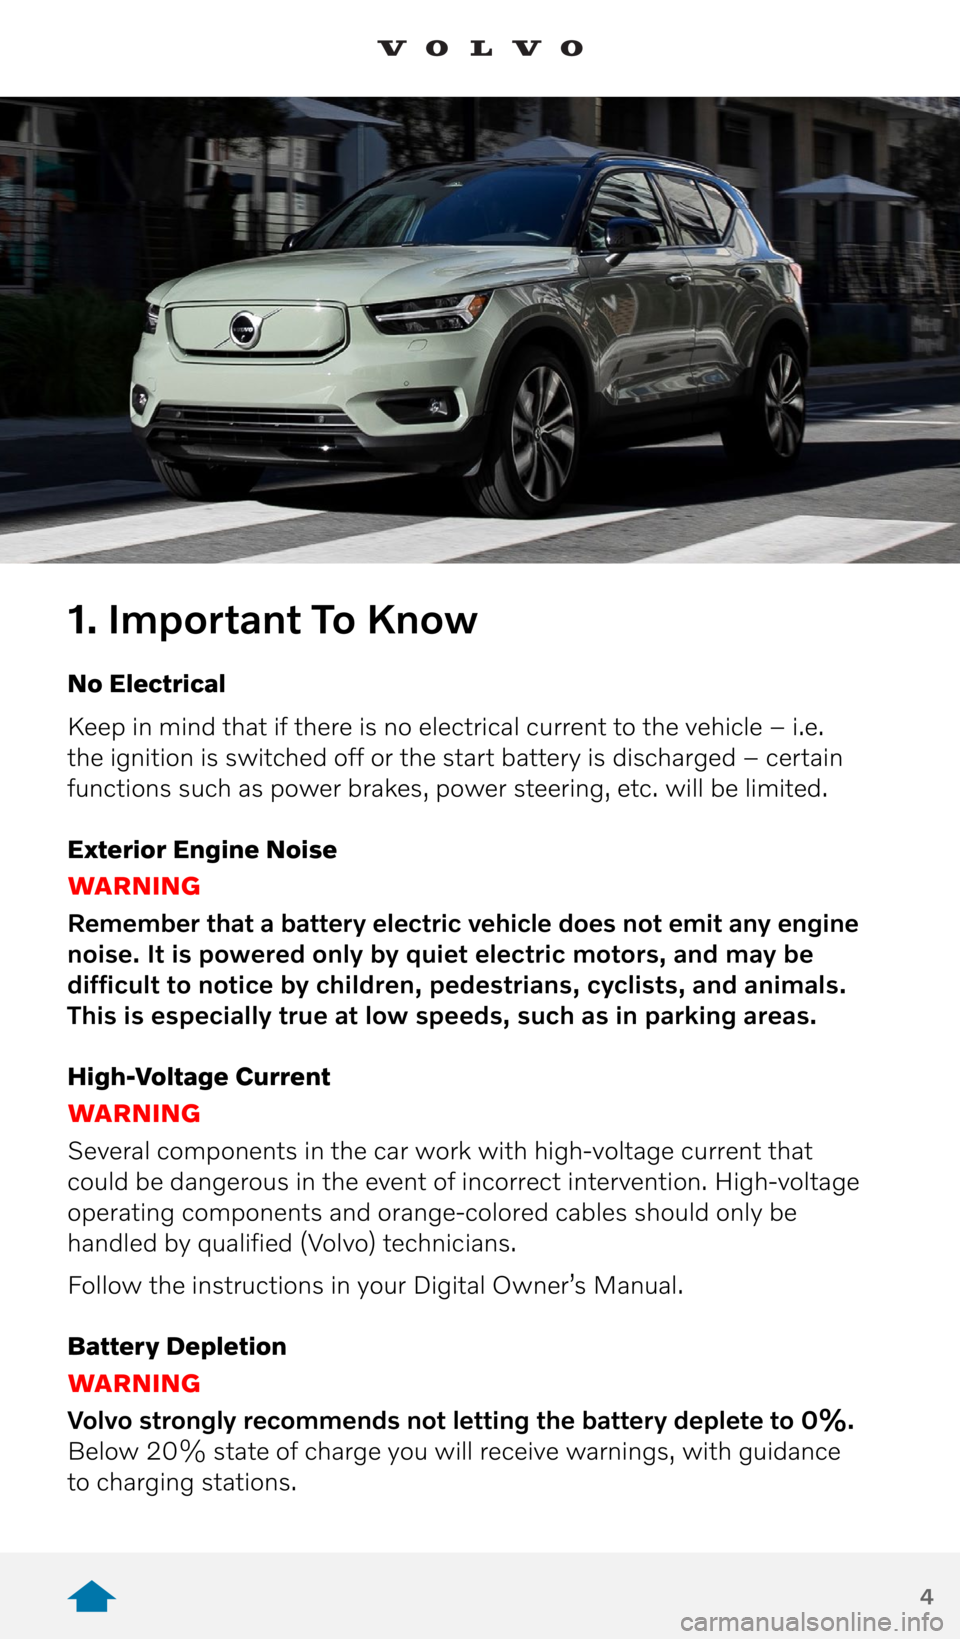 VOLVO XC40 RECHARGE PURE ELECTRIC 2021  Quick Guide 4
1. Important To Know
No Electrical
Keep in mind that if there is no electrical current to the vehicle – i.e. 
the ignition is switched off or the start battery is discharged – certain 
functions